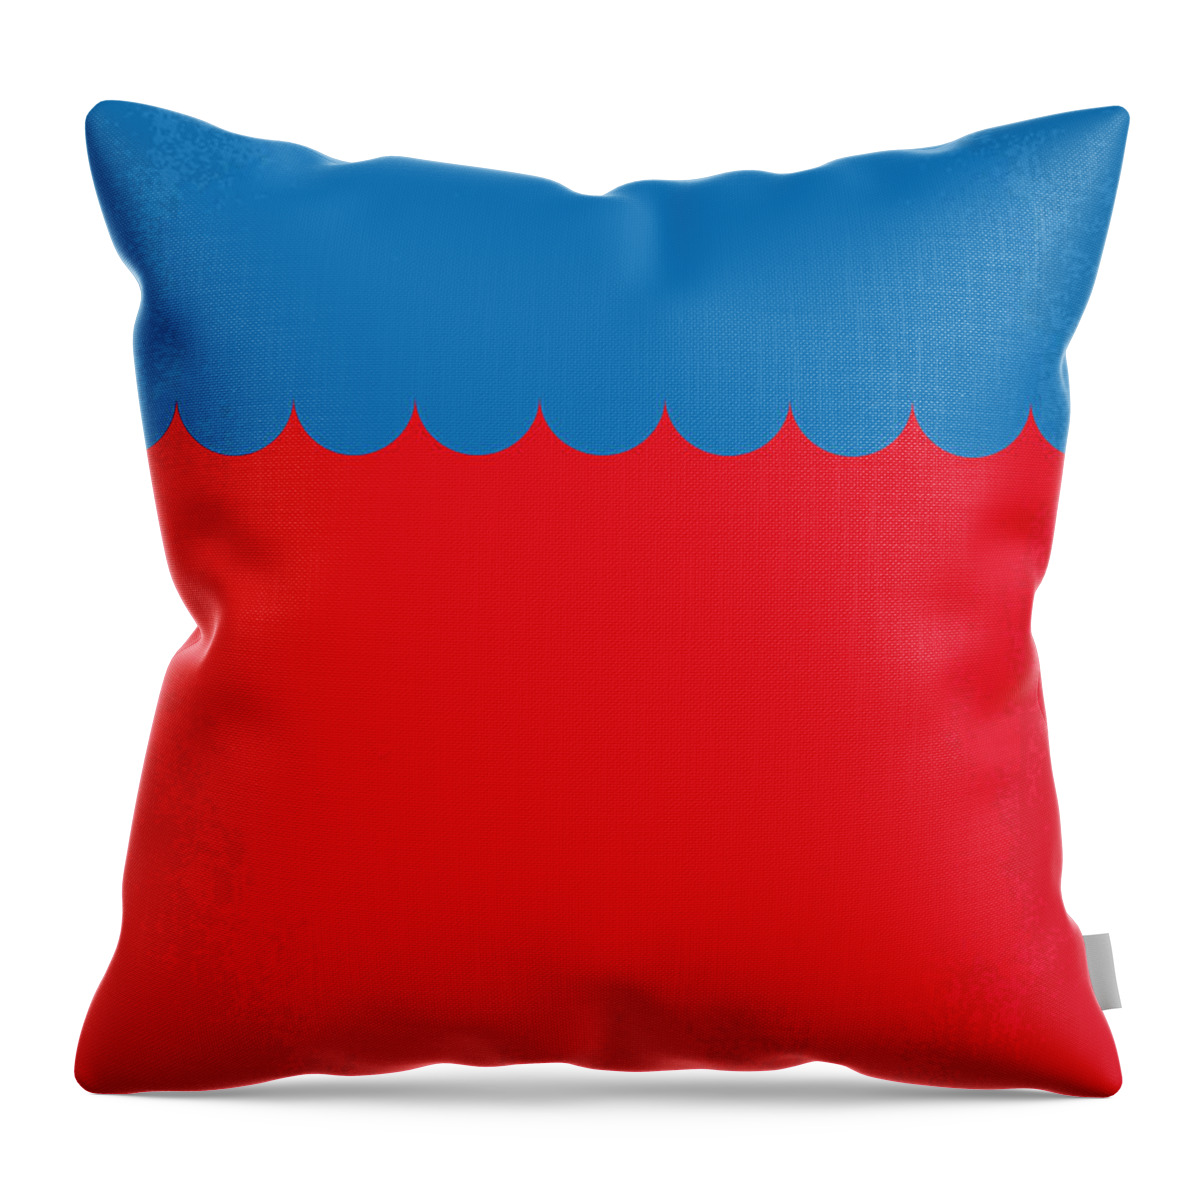 Jaws Throw Pillow featuring the digital art No046 My jaws minimal movie poster by Chungkong Art